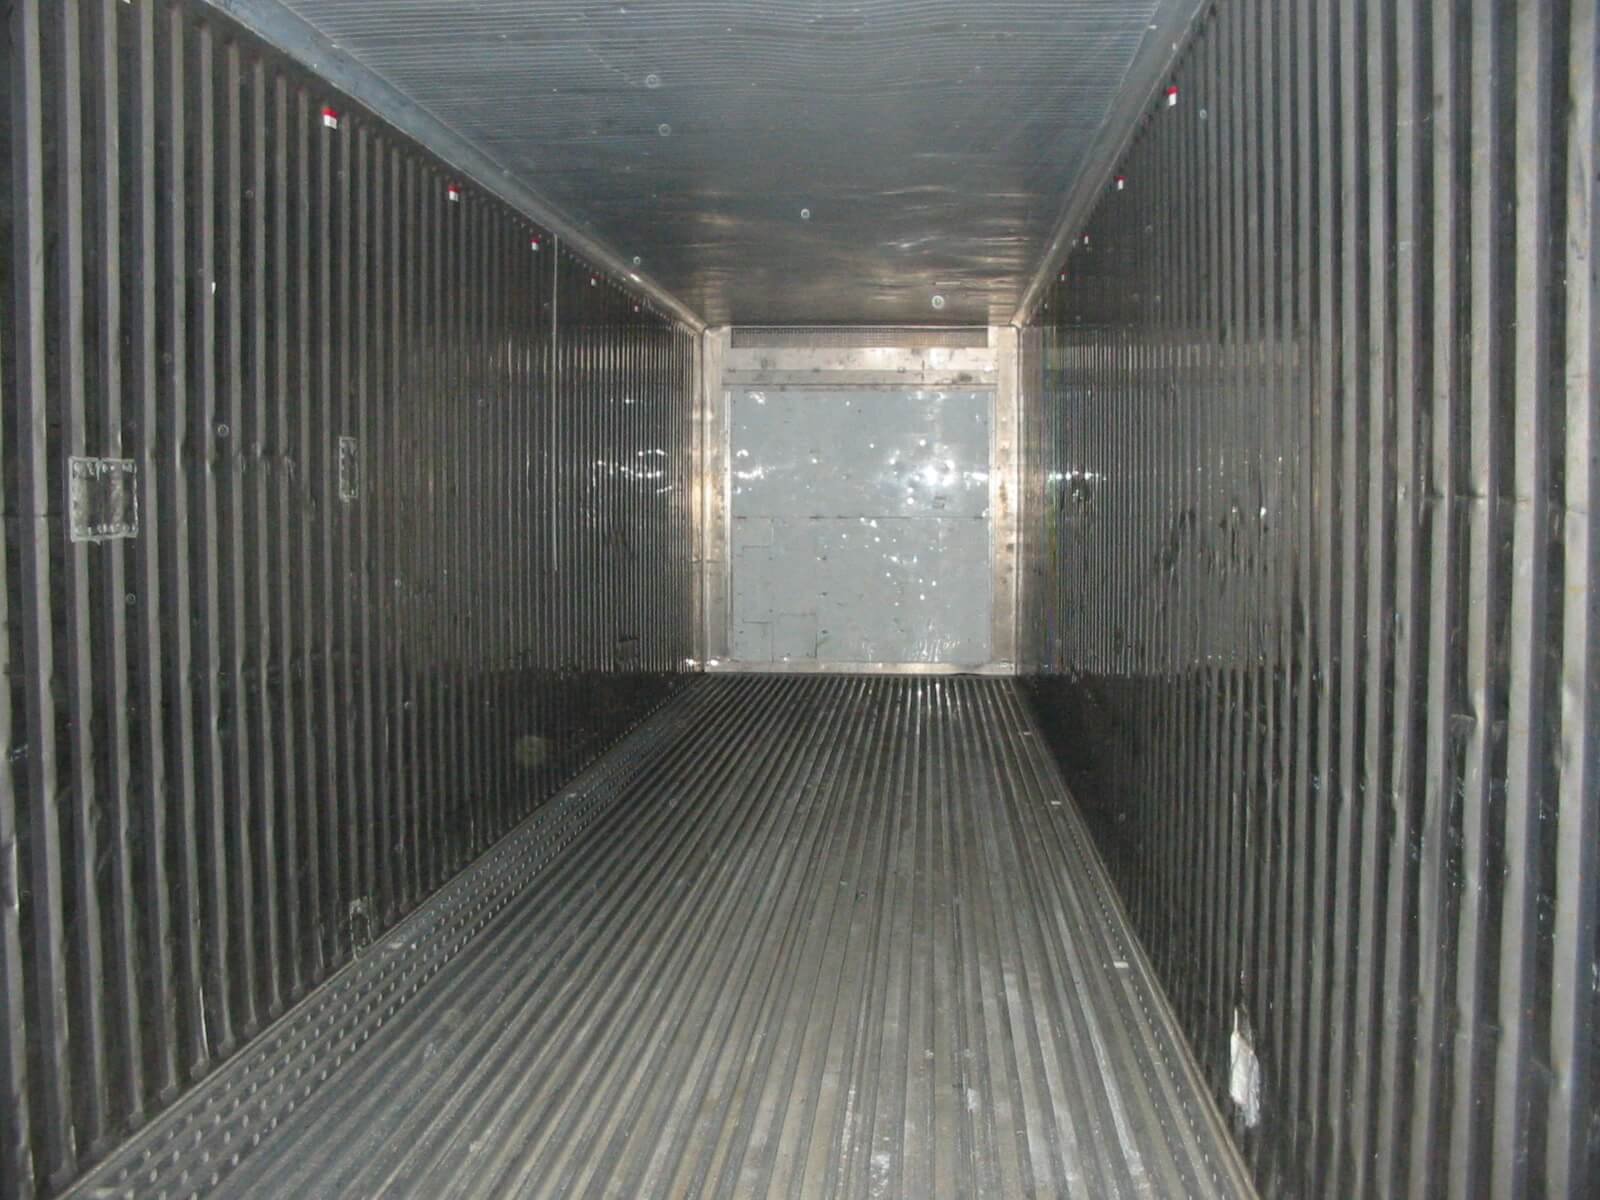 https://cdn.cmgcontainers.net/uploads/product-gallery-images/40ft-hc-insulated-used-shipping-container-1.jpeg